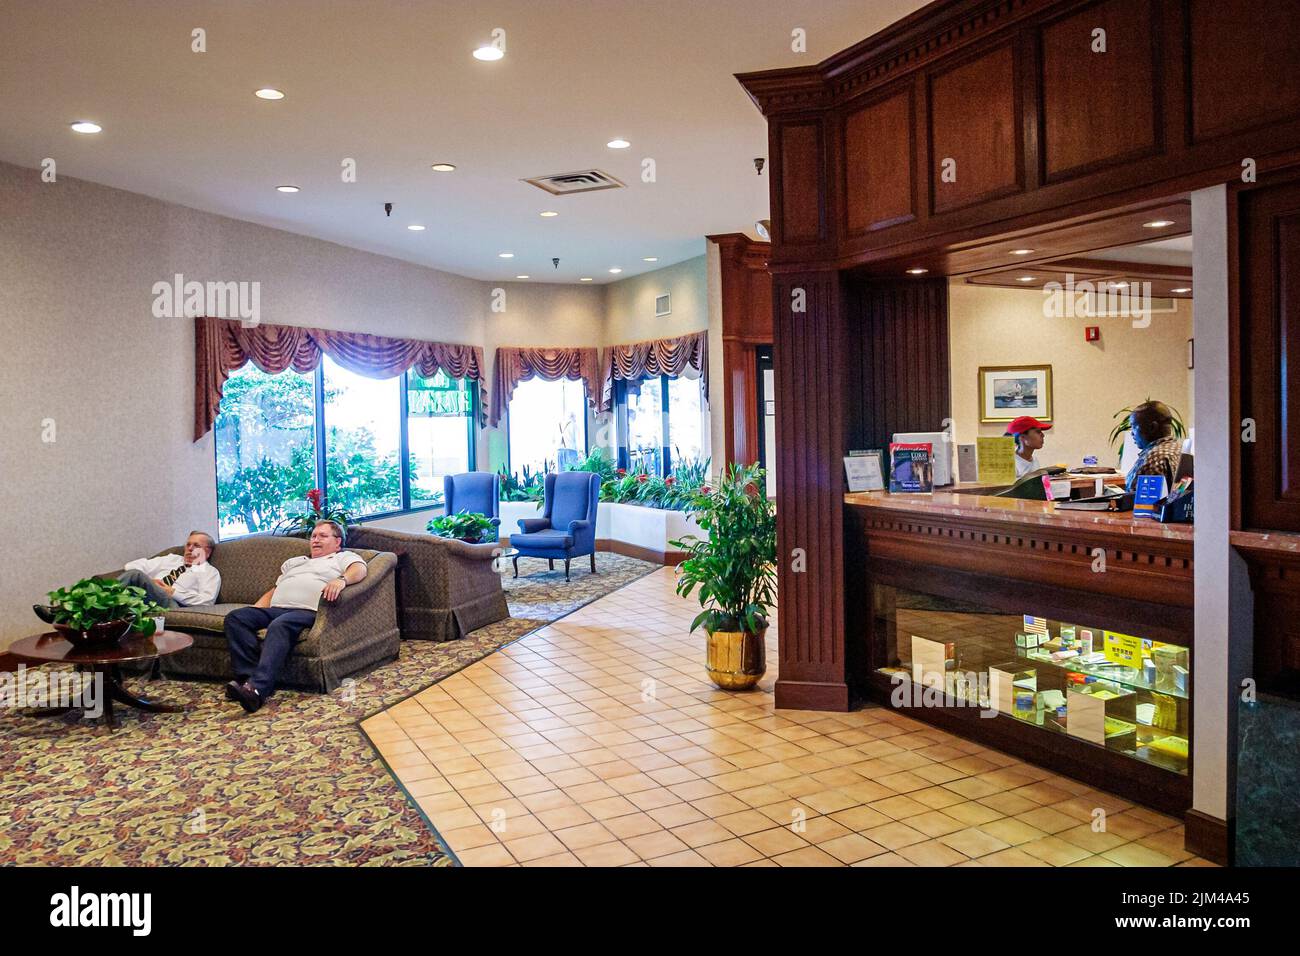 Hampton Virginia,Tidewater Area,Quality Inn hotel hotels lodging inn lobby front desk reservation inside interior,man woman couple people person scene Stock Photo